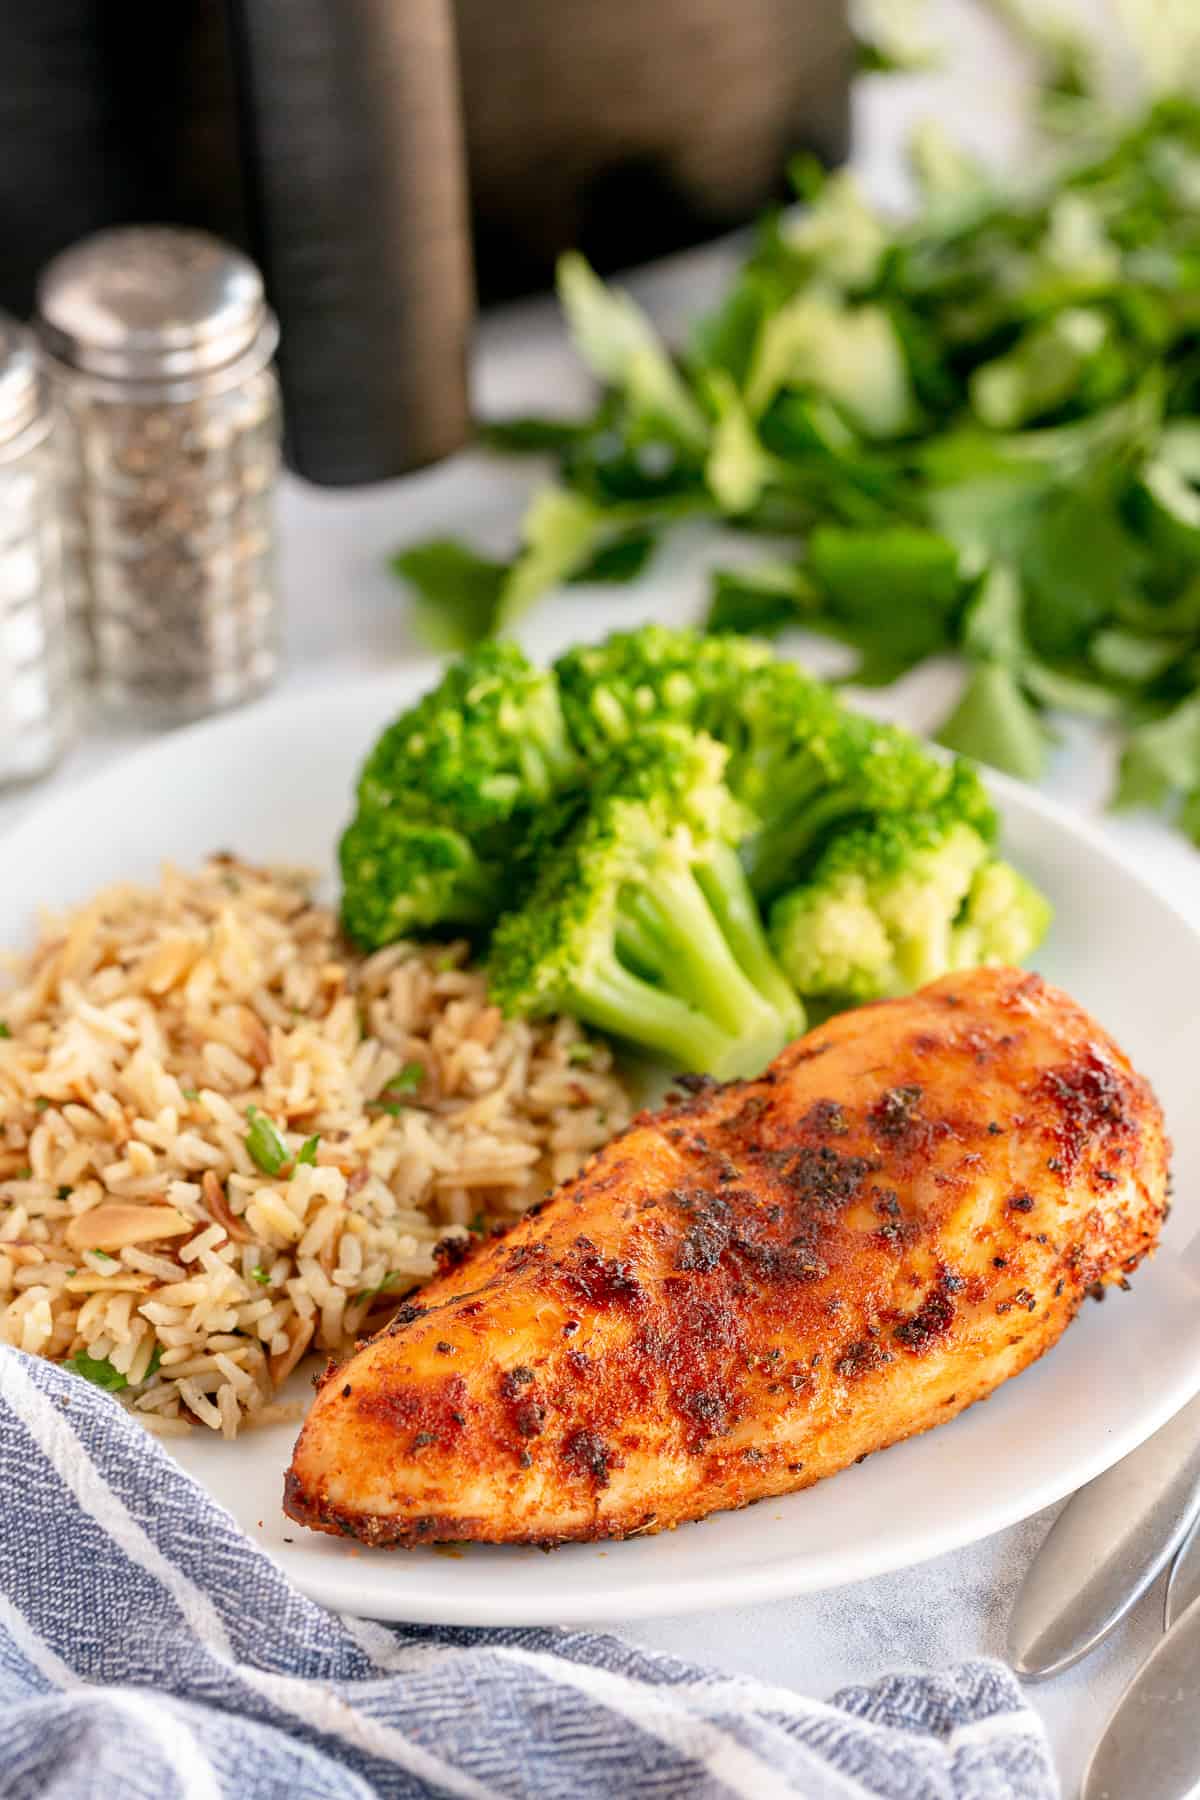 A cooked piece of chicken on a plate with rice and broccoli.